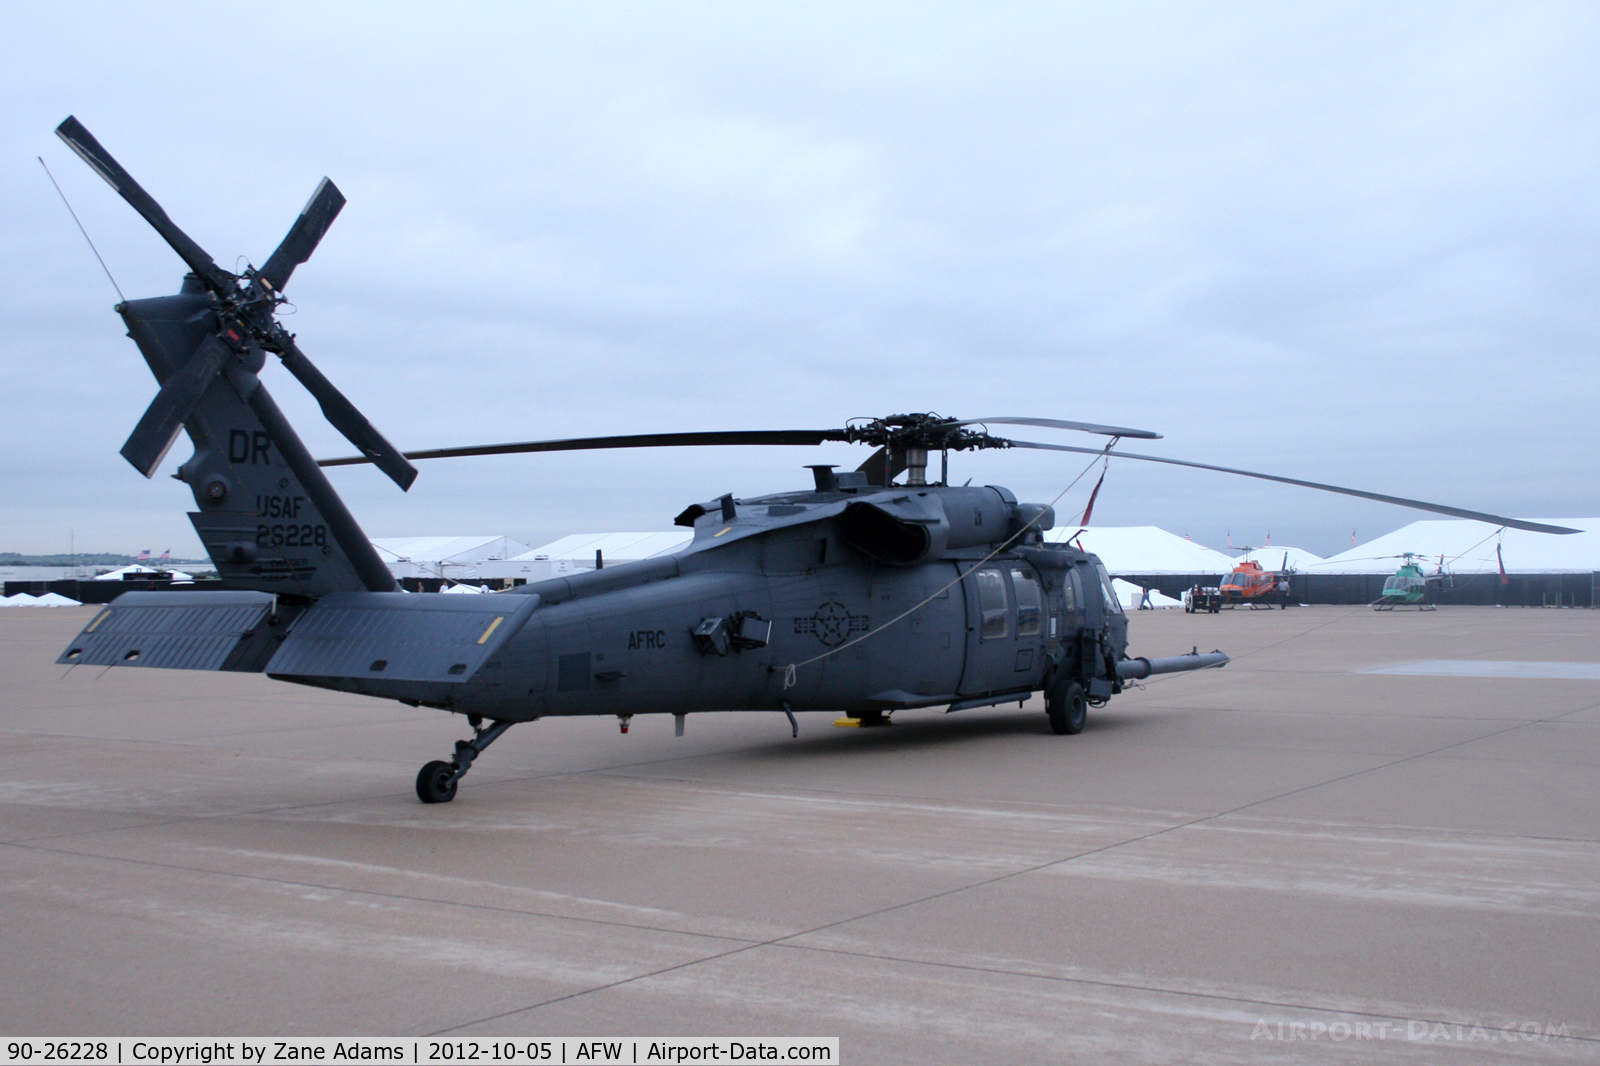 90-26228, 1990 Sikorsky HH-60G Pave Hawk C/N 70-1556, At the 2012 Alliance Airshow - Fort Worth, TX